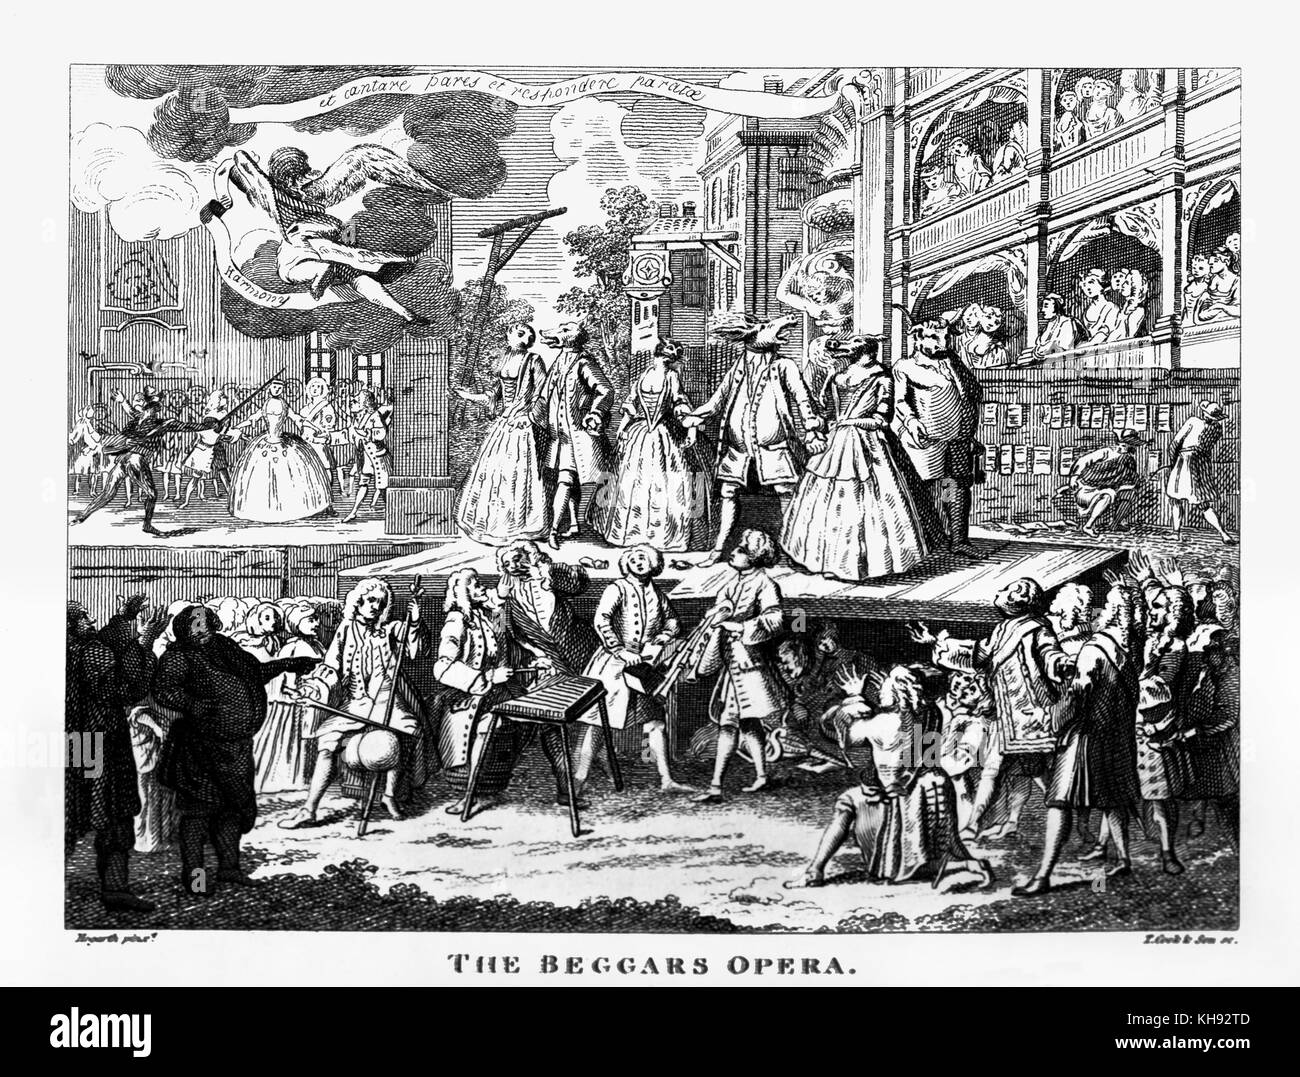 The Beggar's Opera - etching by William Hogarth . Scene from  ballad opera by the English poet and dramatist John Gay and set to music by the German composer, Johann Christoph Pepusch.  John Gay: 30 June 1685 - 4 December 1732. Johann Christopher Pepusch: 1667-1752. William Hogarth: 10 November 1697 –  26 October 1764. Stock Photo